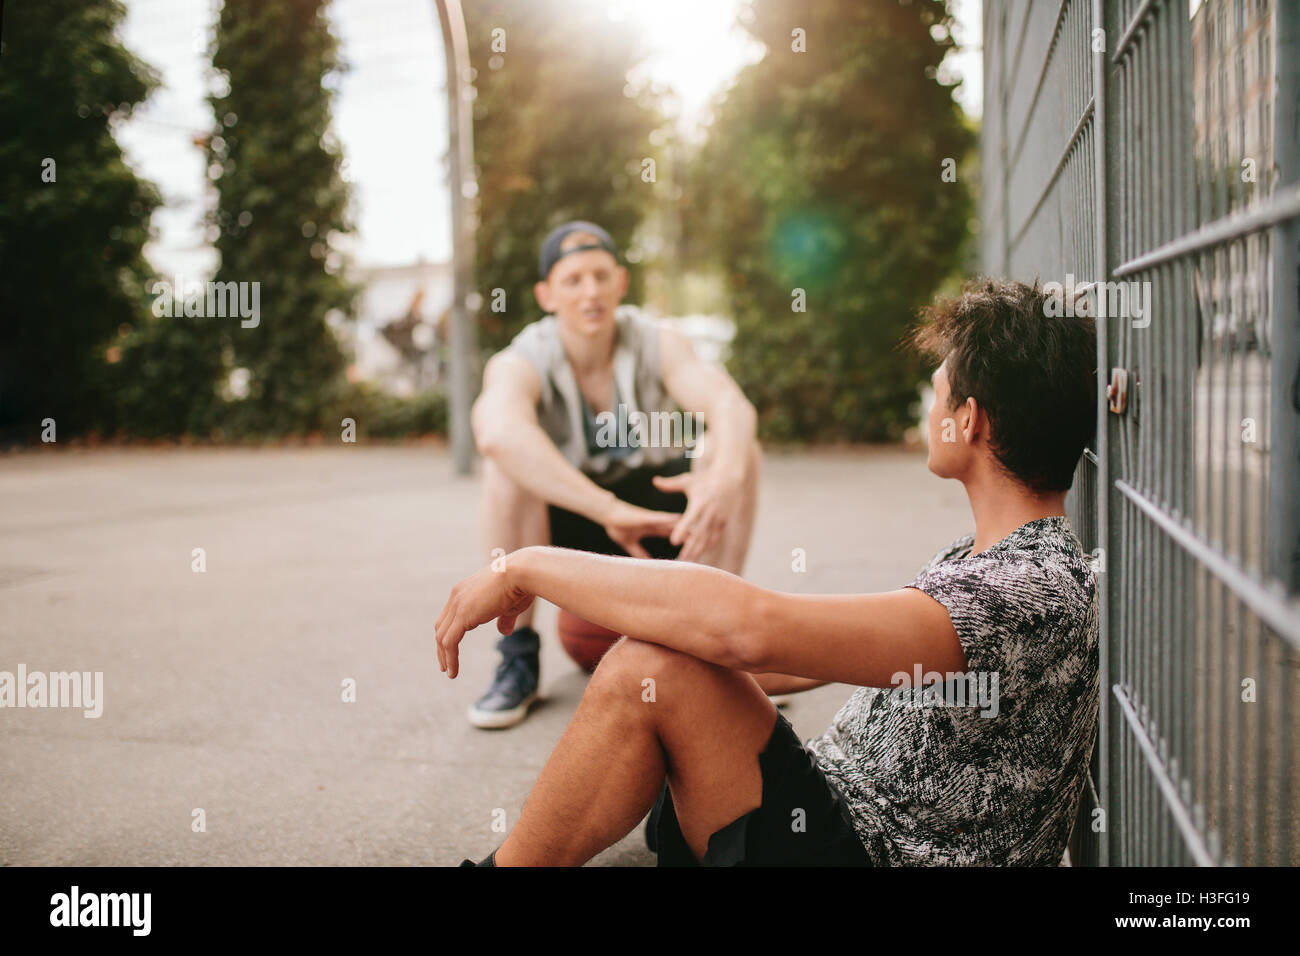 Young man relaxing on basketball court with a friend. Streetball players taking break after playing a game. Stock Photo